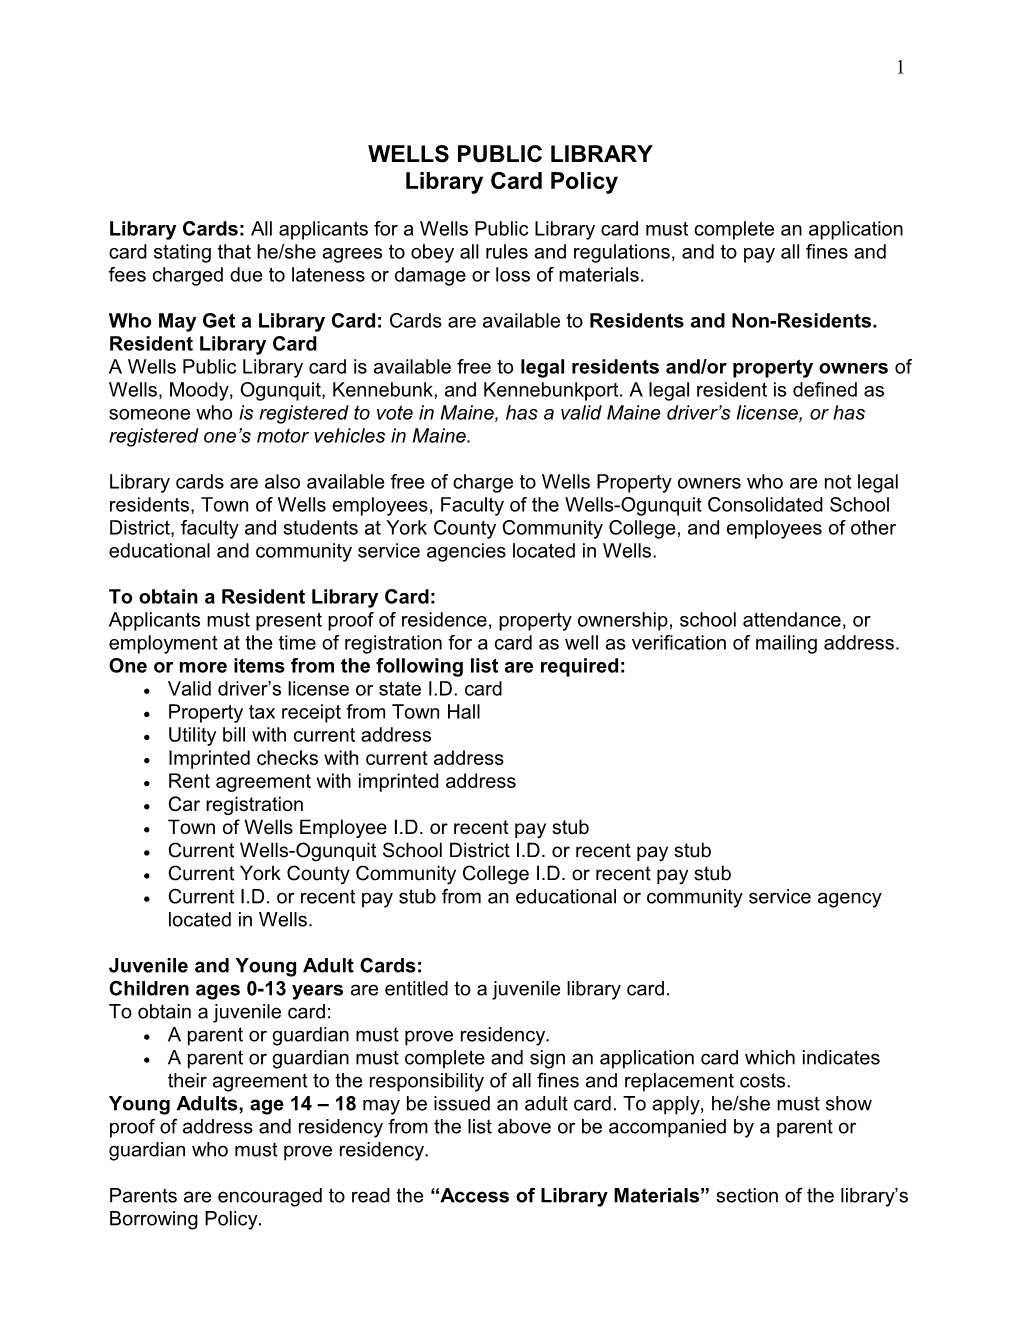 Library Card and Borrowing Policy